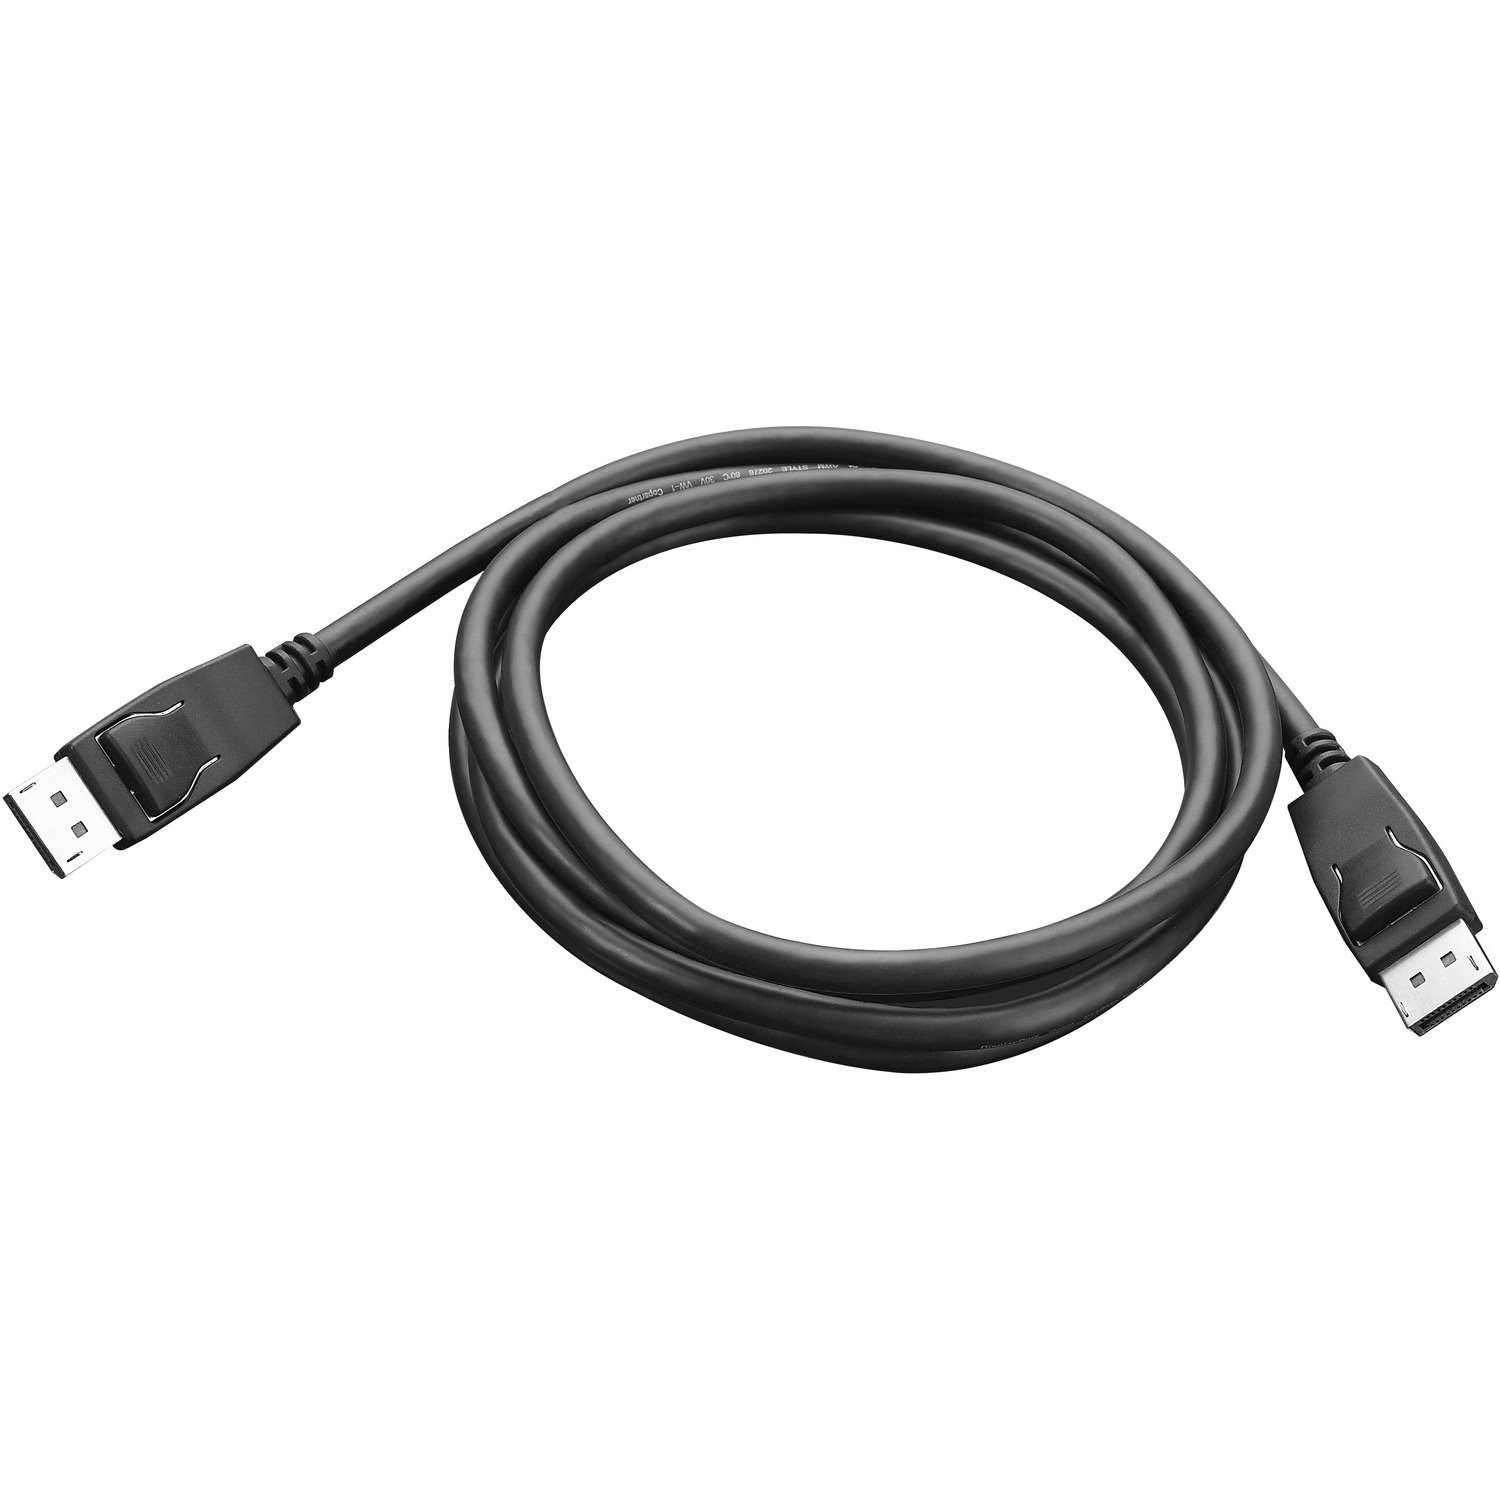 Lenovo 1.83 m DisplayPort A/V Cable for Monitor